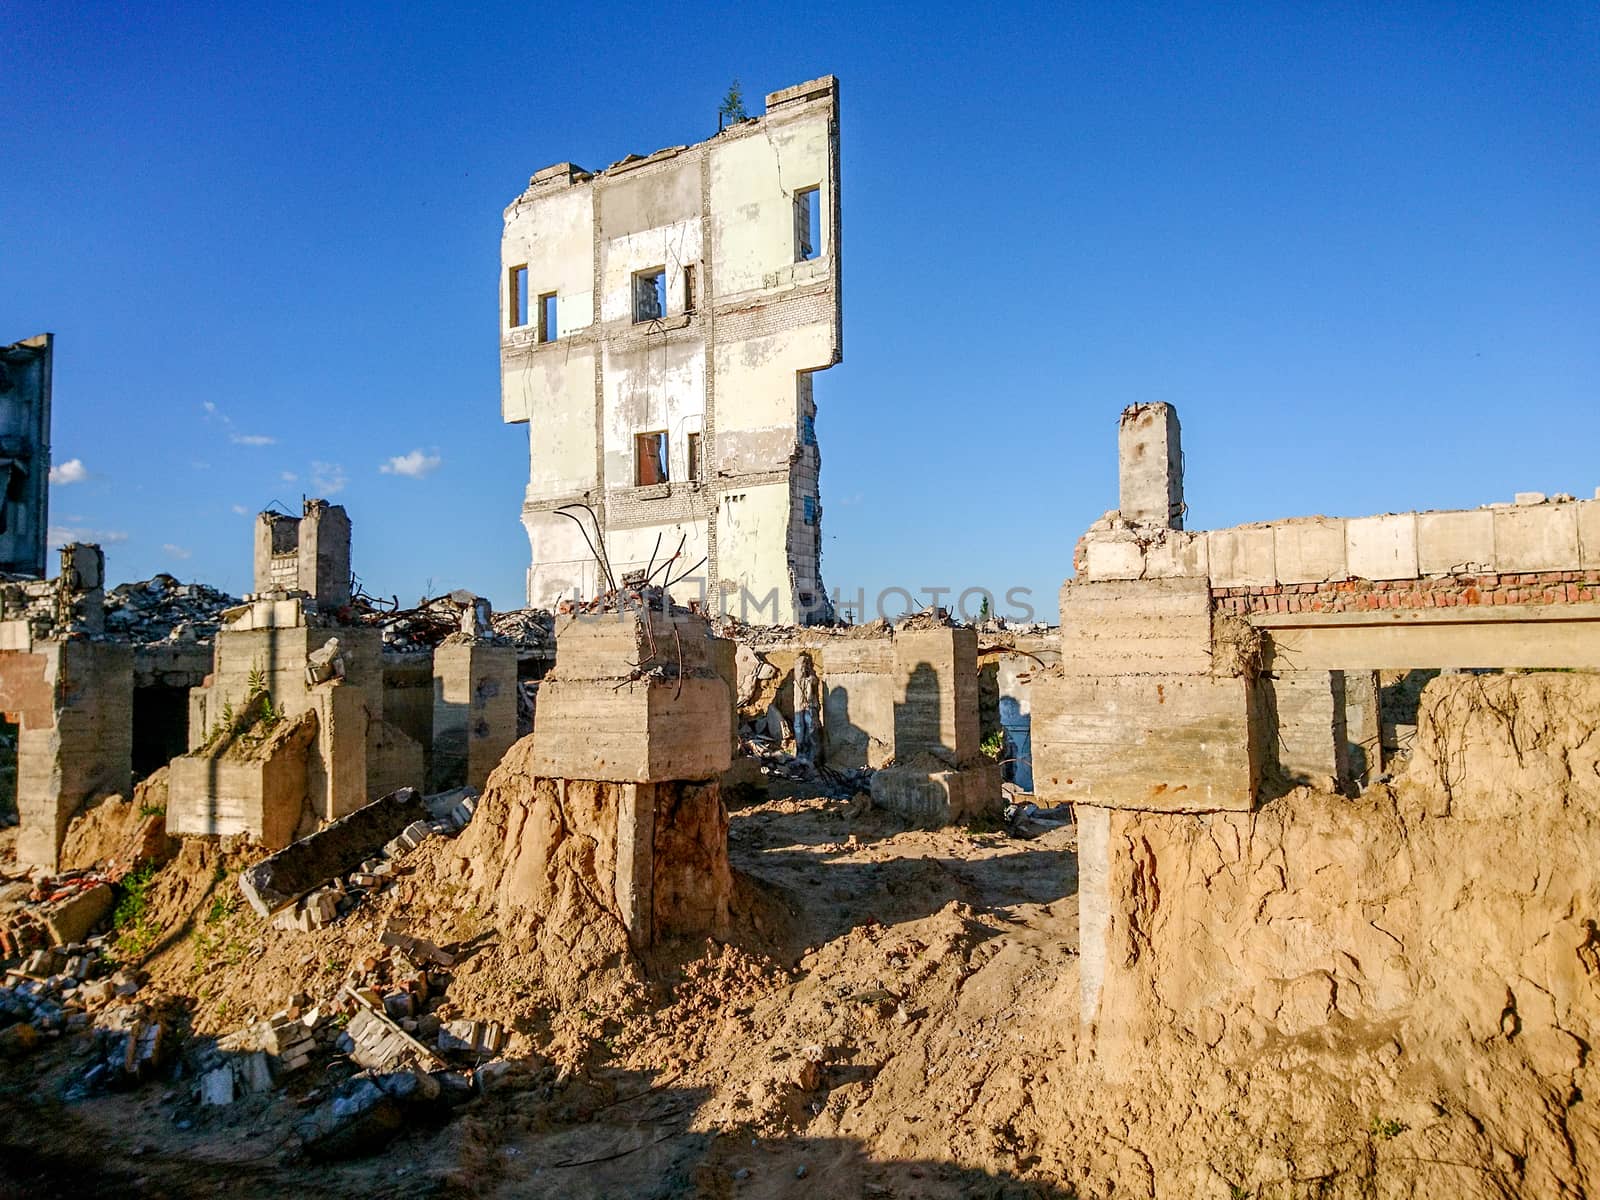 The ruins of a large destroyed building, pieces of stone, concrete, clay and metal against the blue clear sky